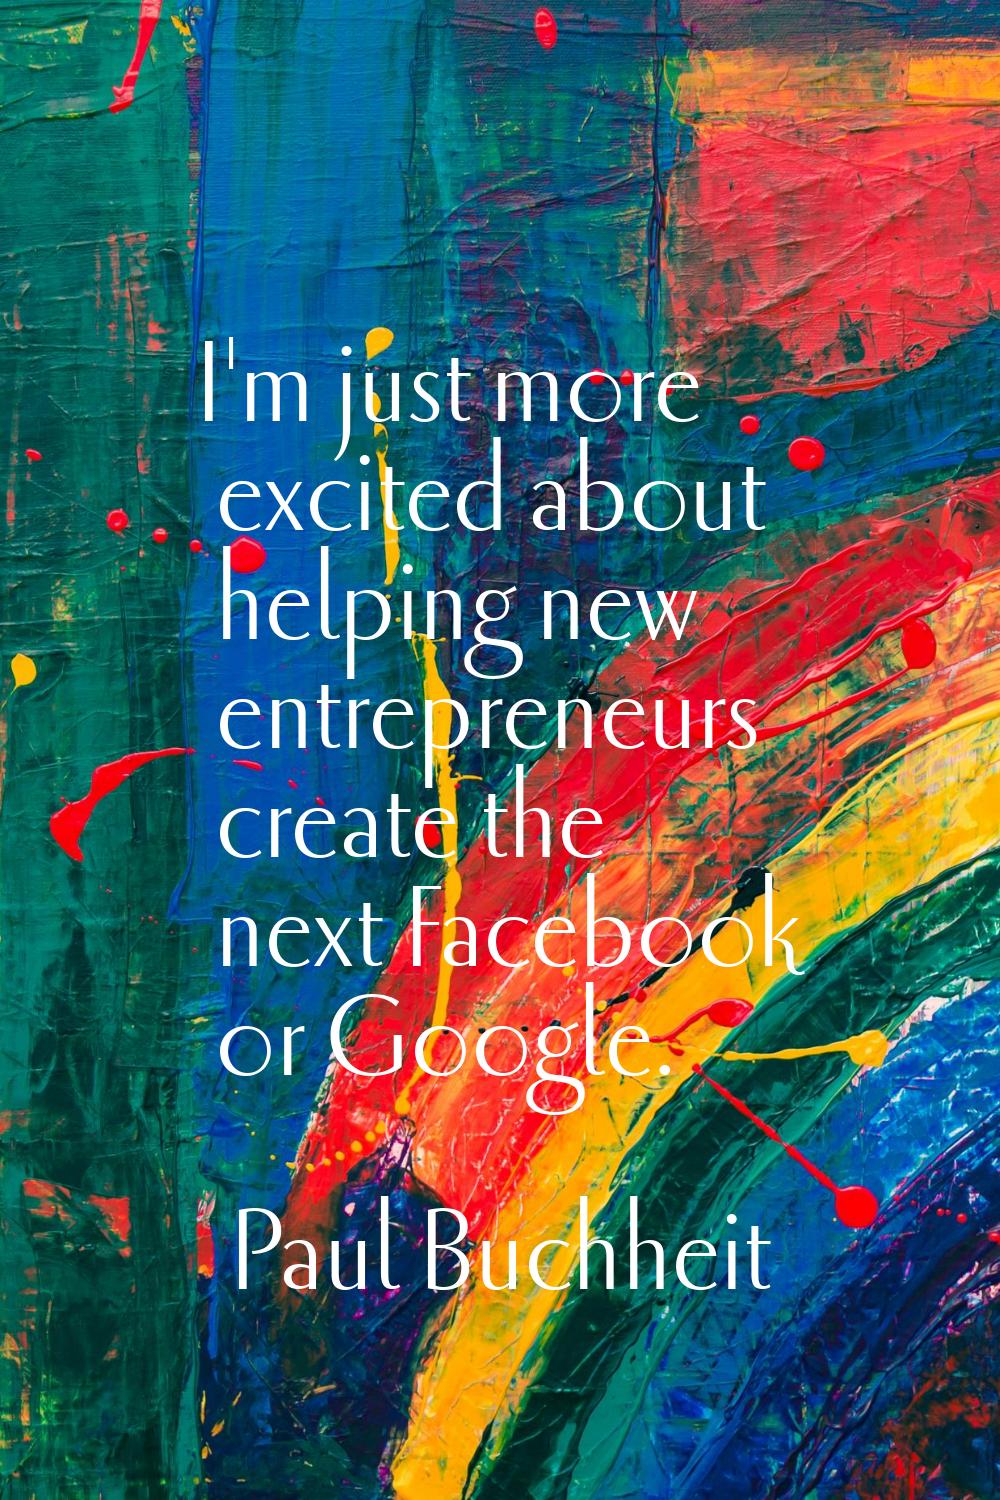 I'm just more excited about helping new entrepreneurs create the next Facebook or Google.